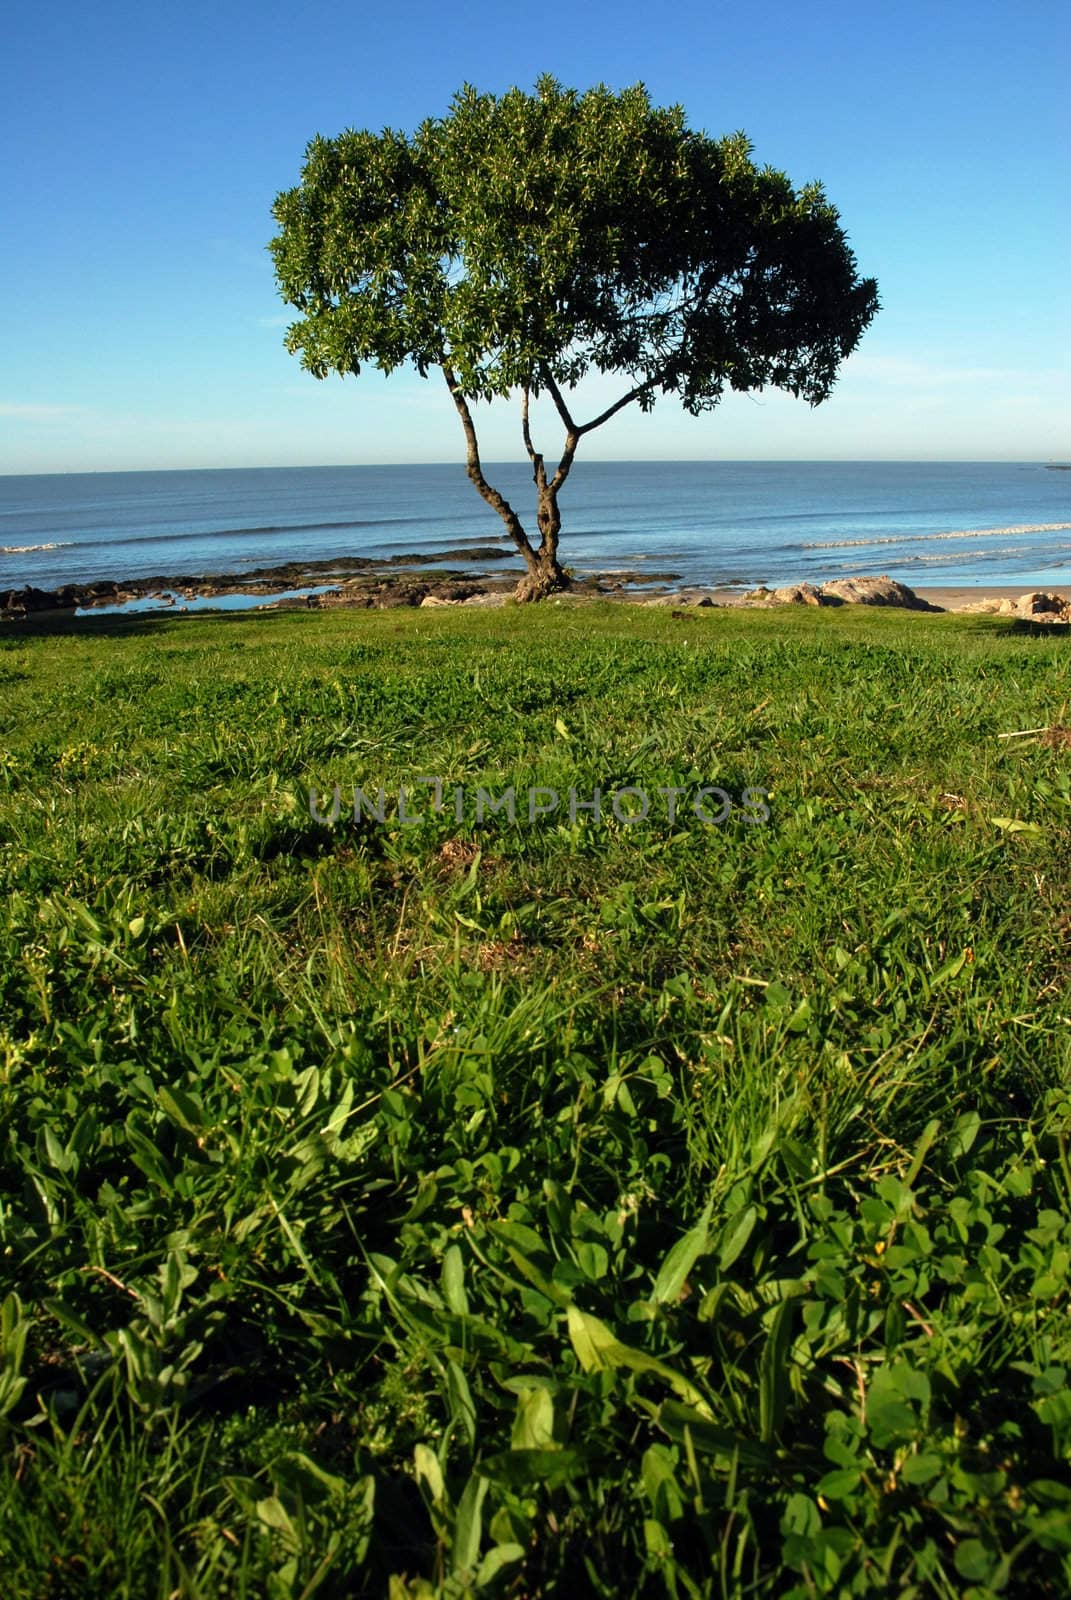 Single tree, green grass and the sea on a blue sky background